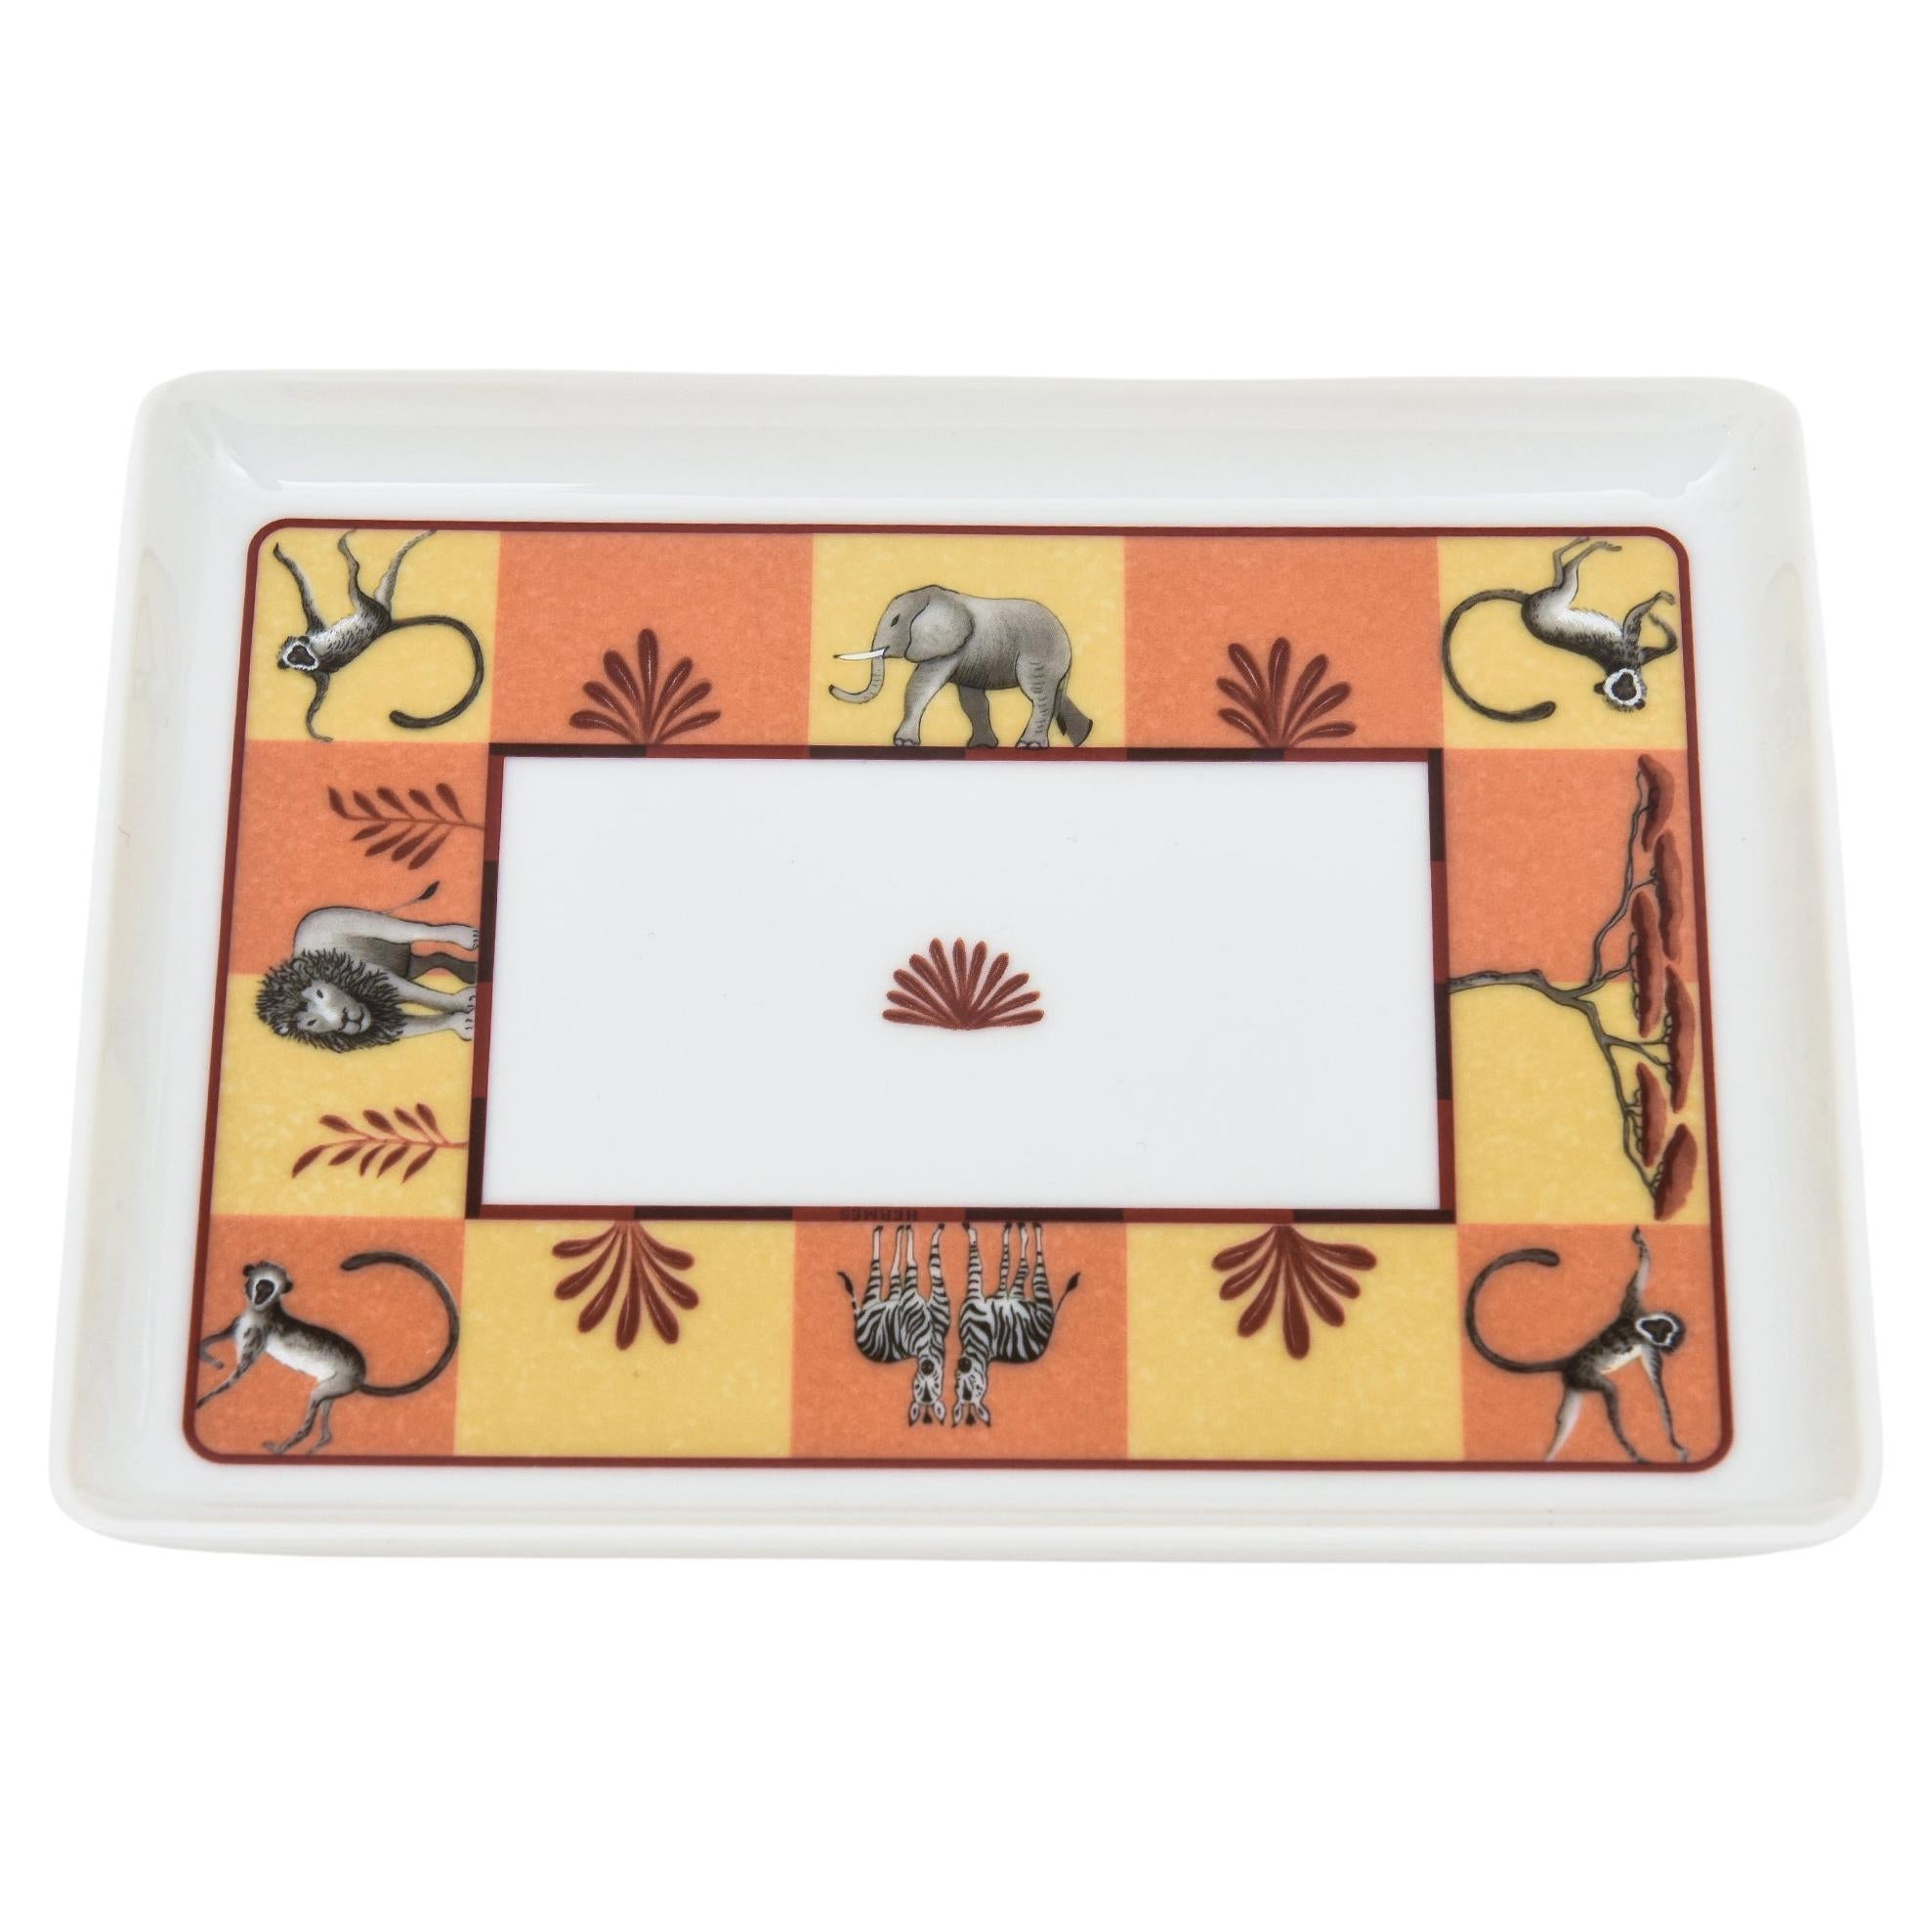 Hermes African Animal Series Porcelain Tray Or Dish